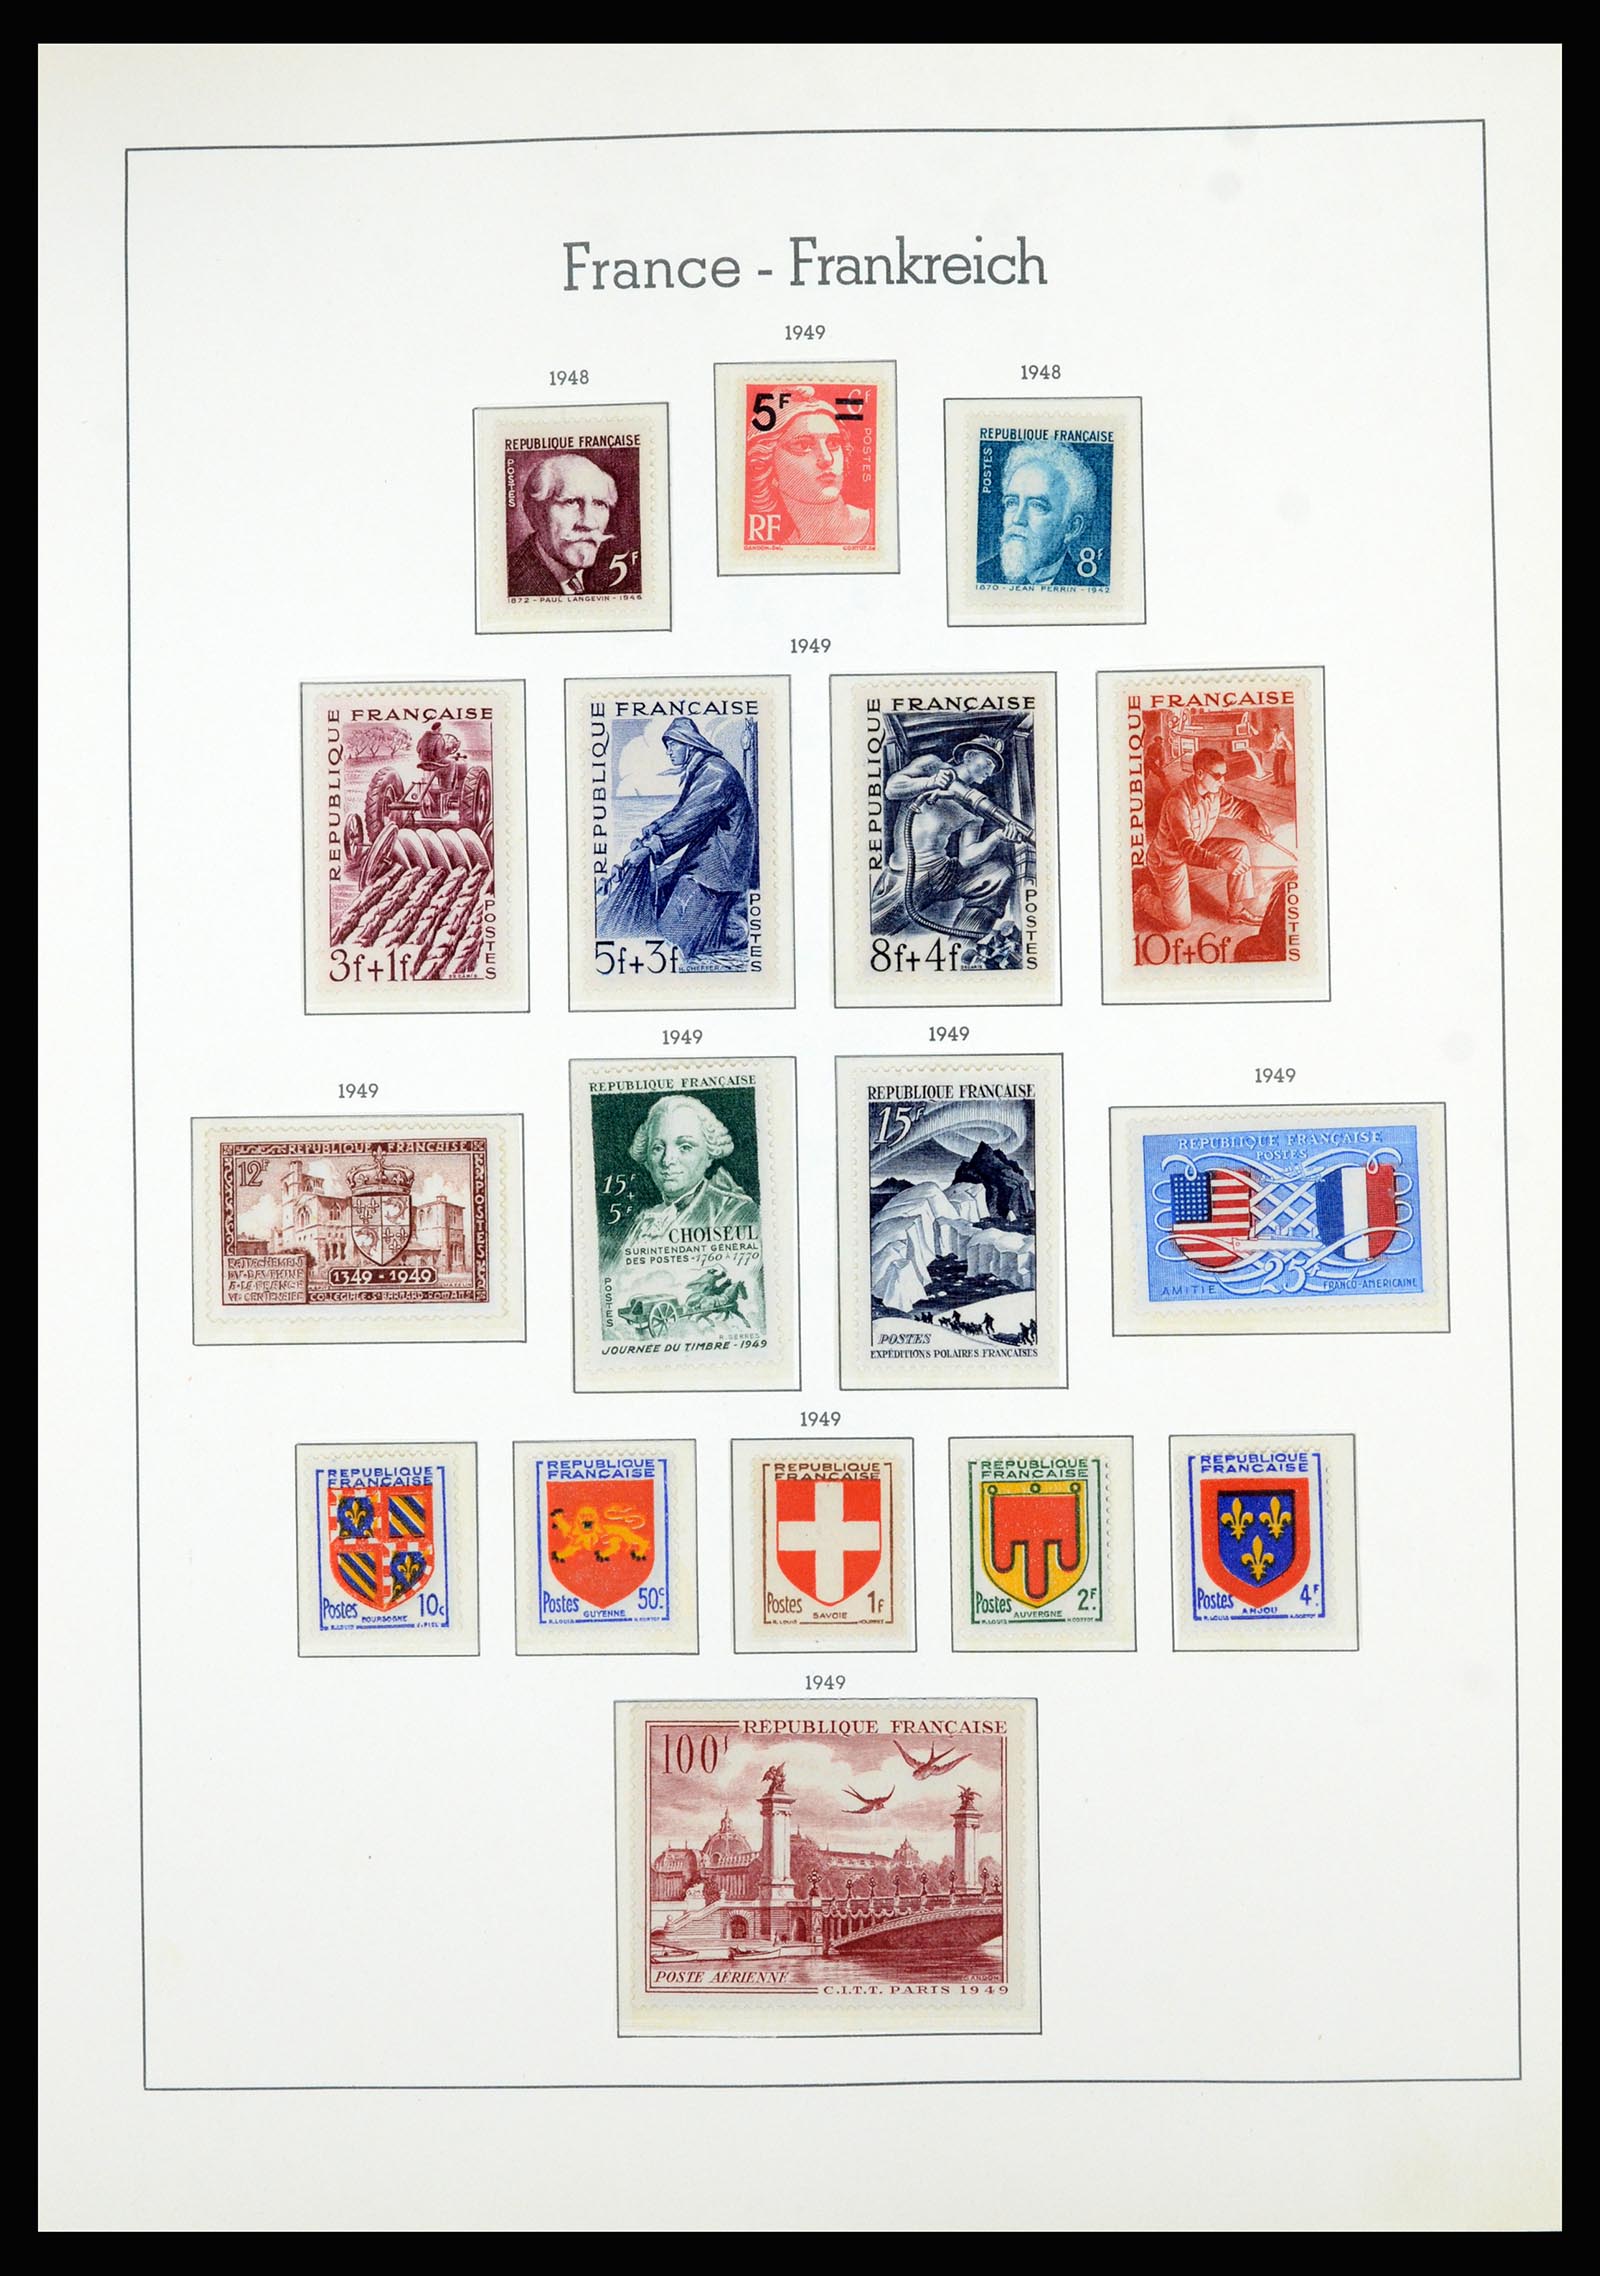 36694 059 - Stamp collection 36694 France 1863-2006.